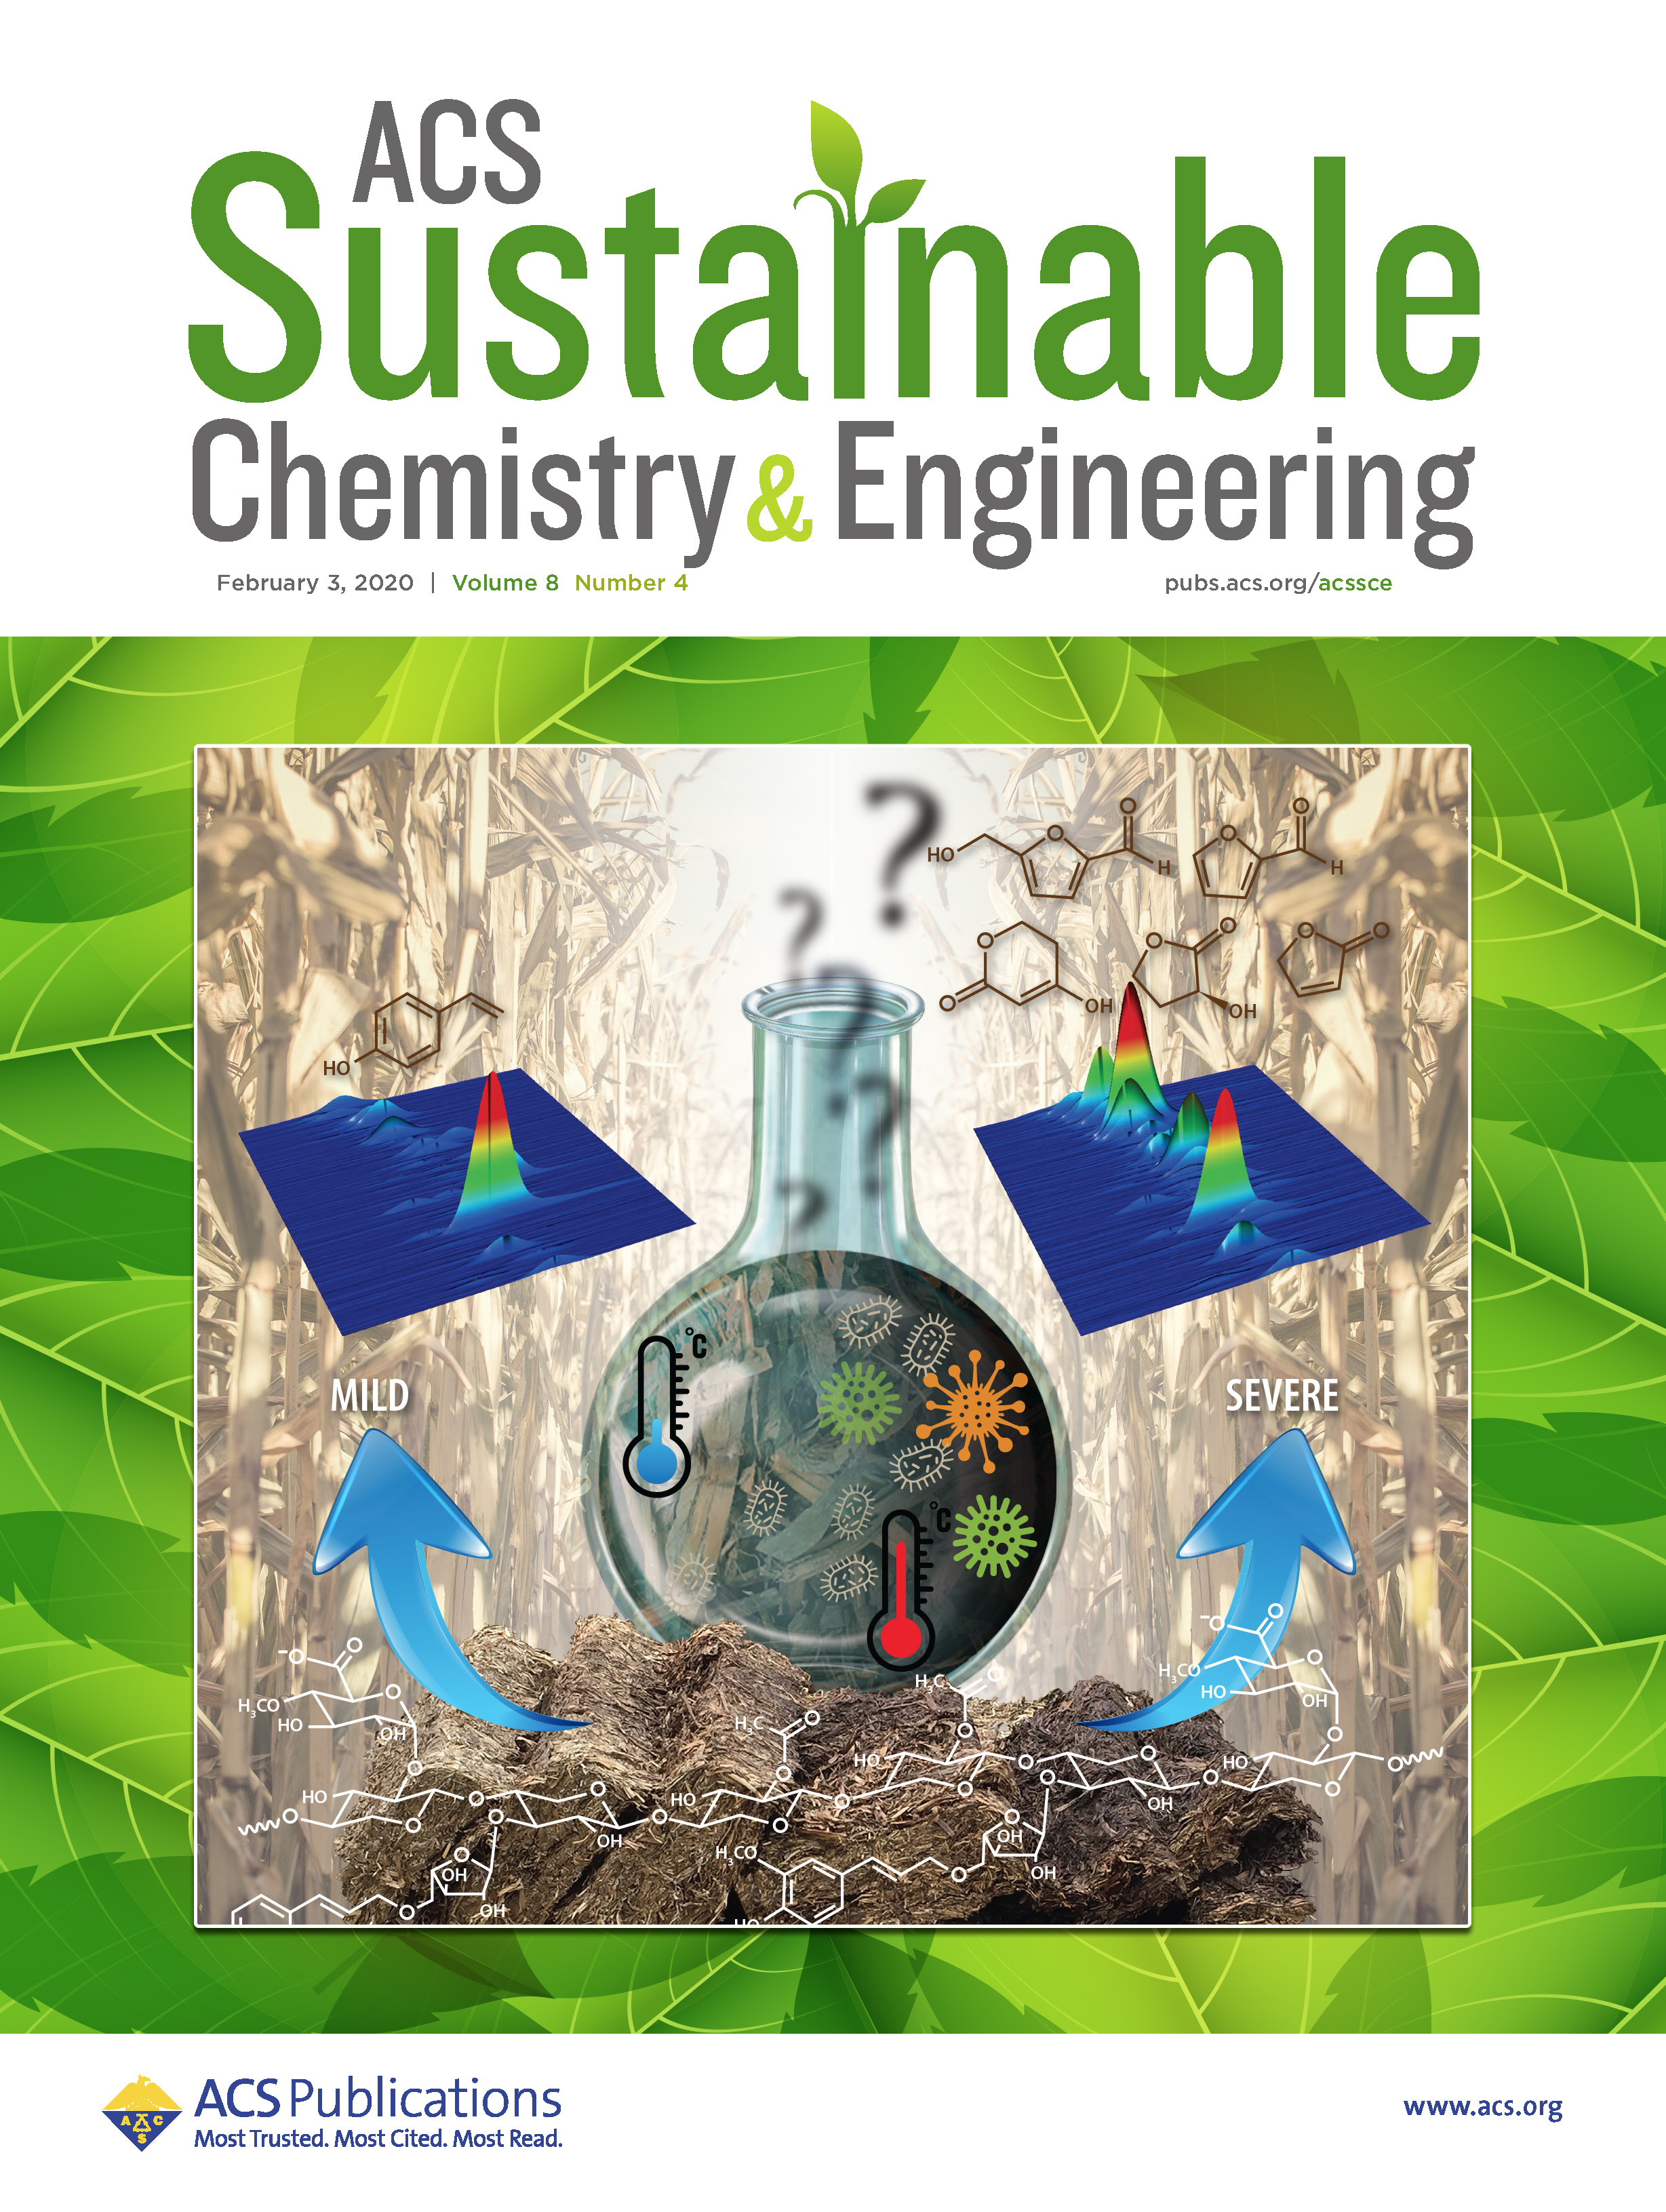 Image of Journal Article Cover Design